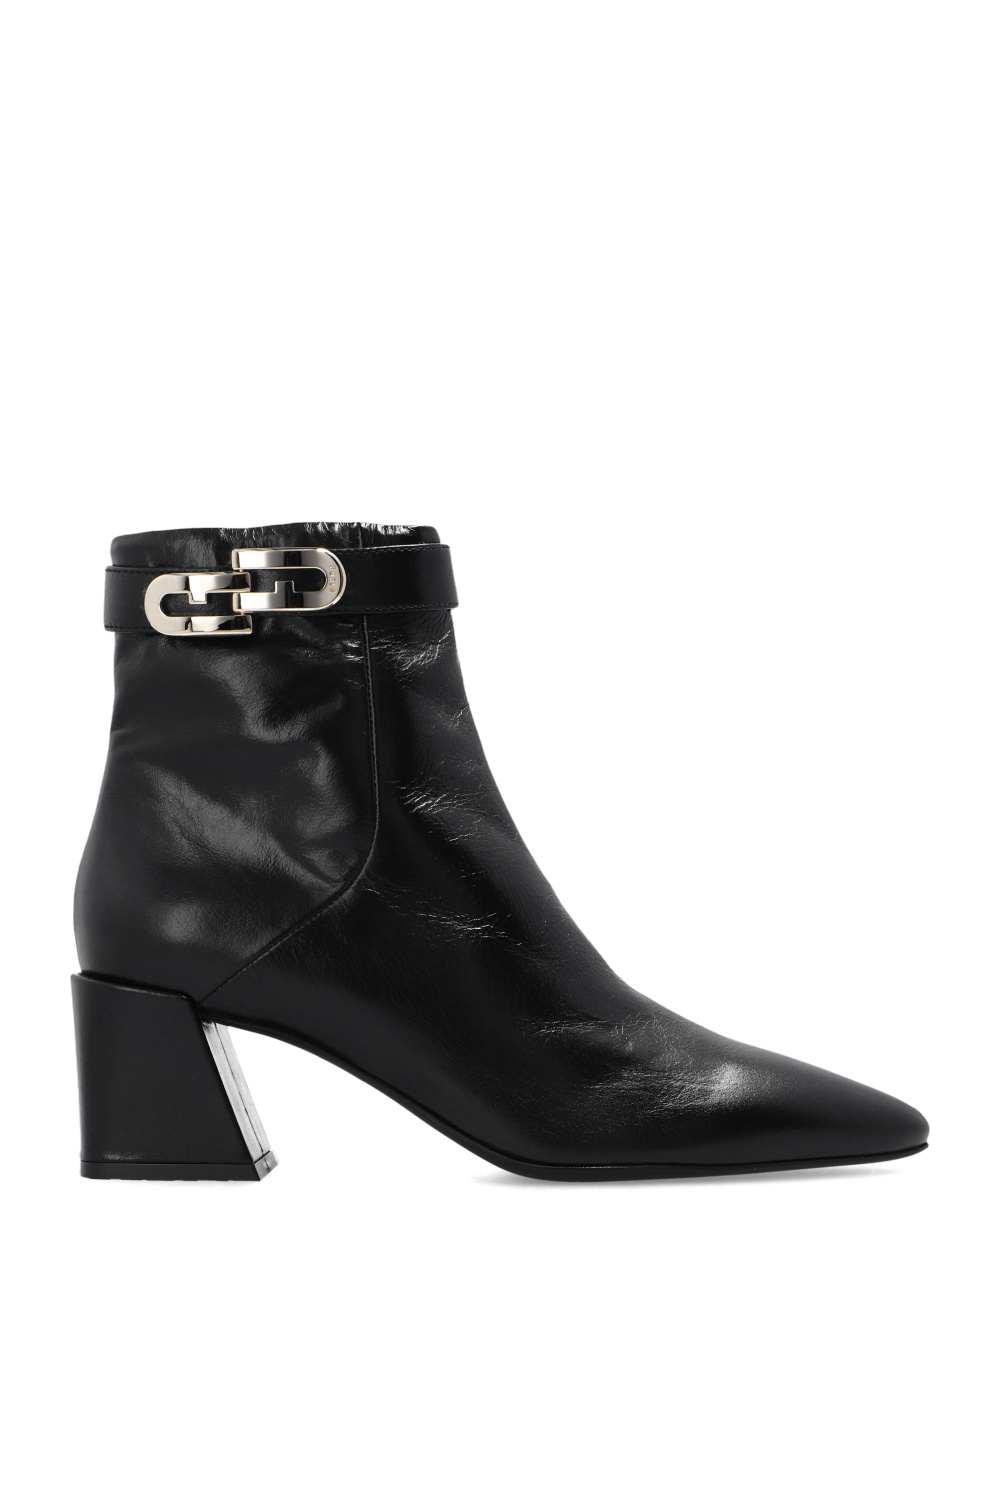 Furla ‘Chain’ heeled ankle boots